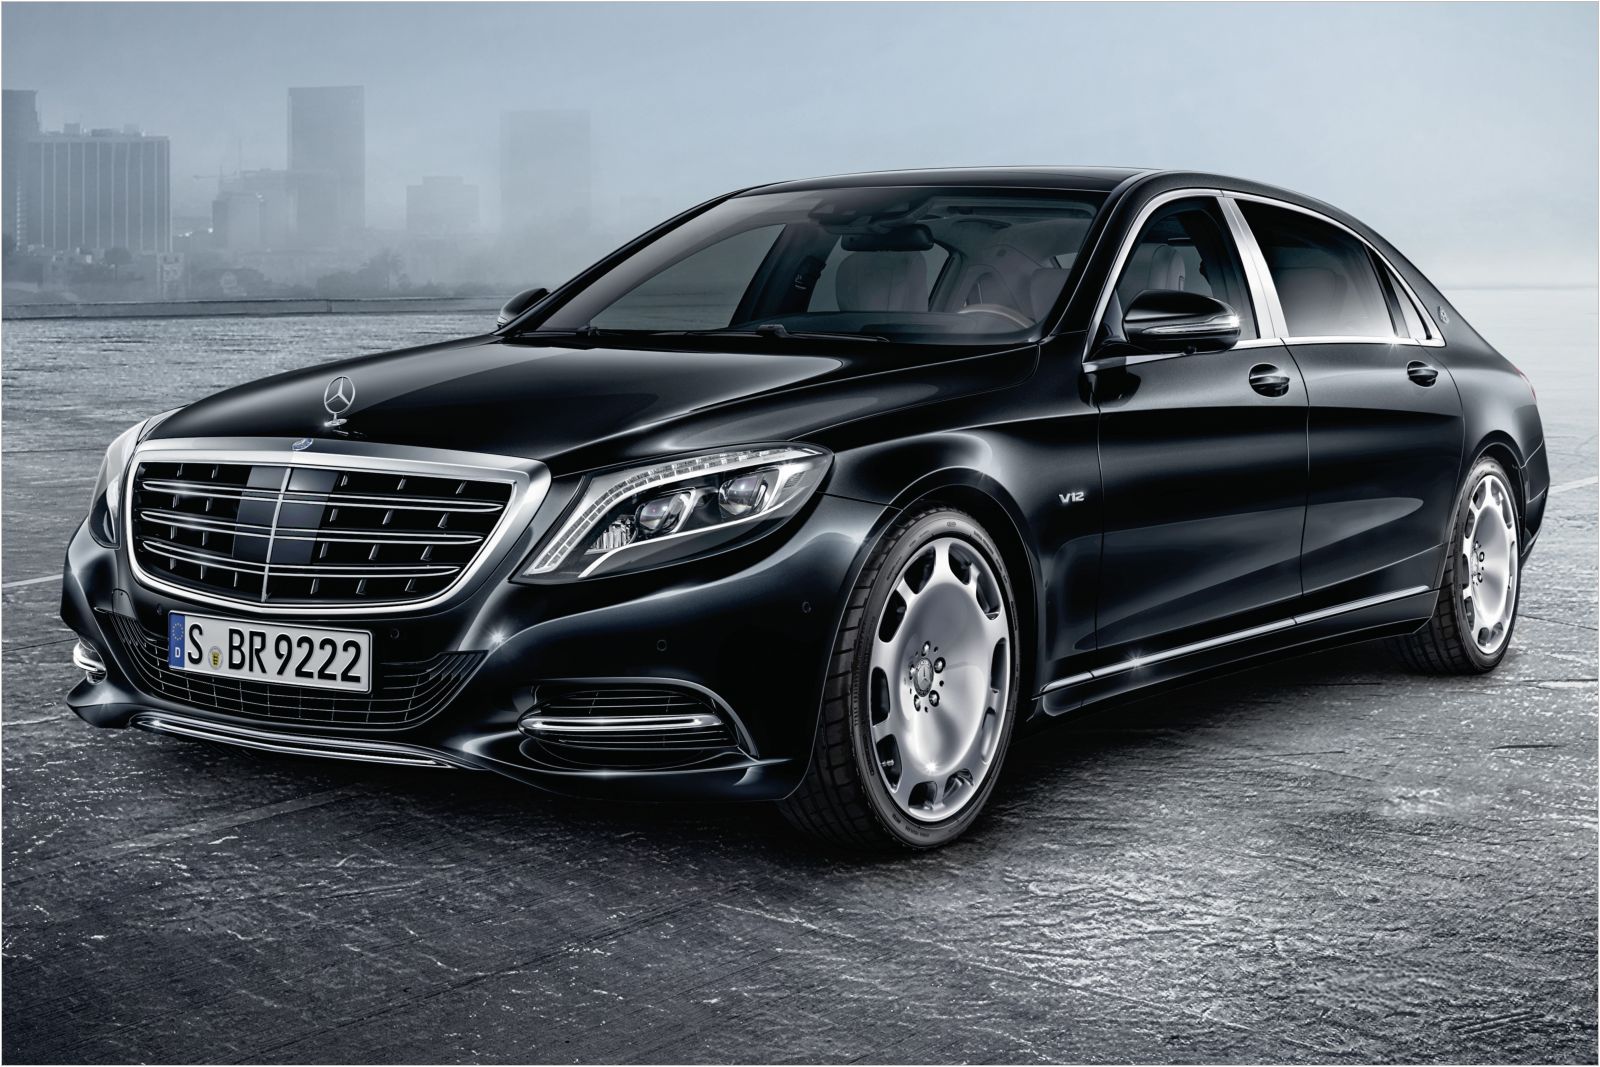 Mercedes-Benz S600 Maybach Guard, 1600x1067px, img-1